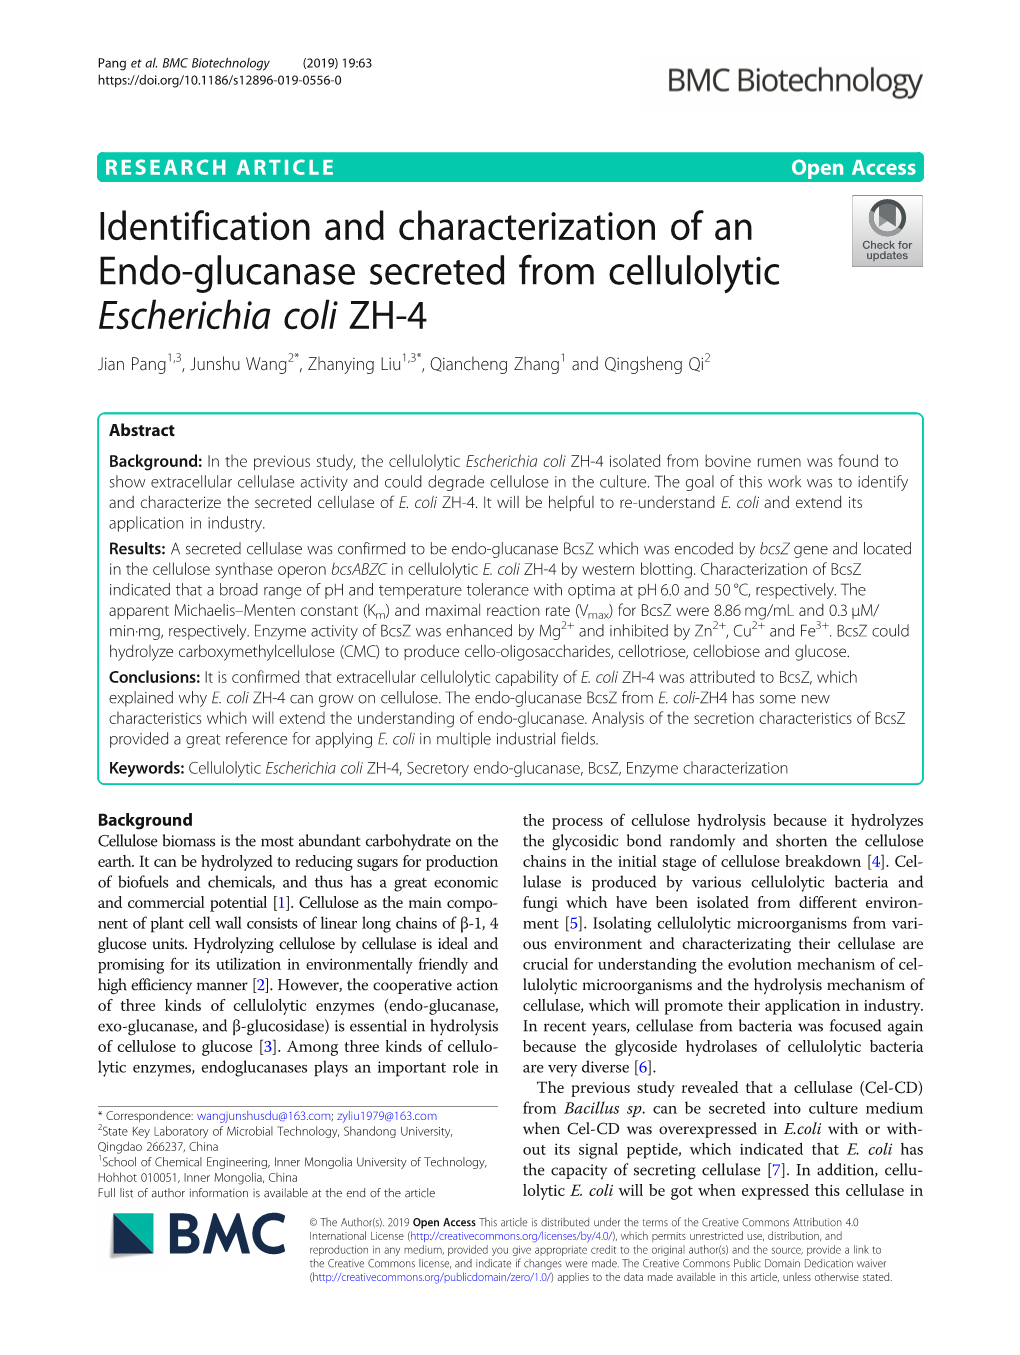 Identification and Characterization of an Endo-Glucanase Secreted From